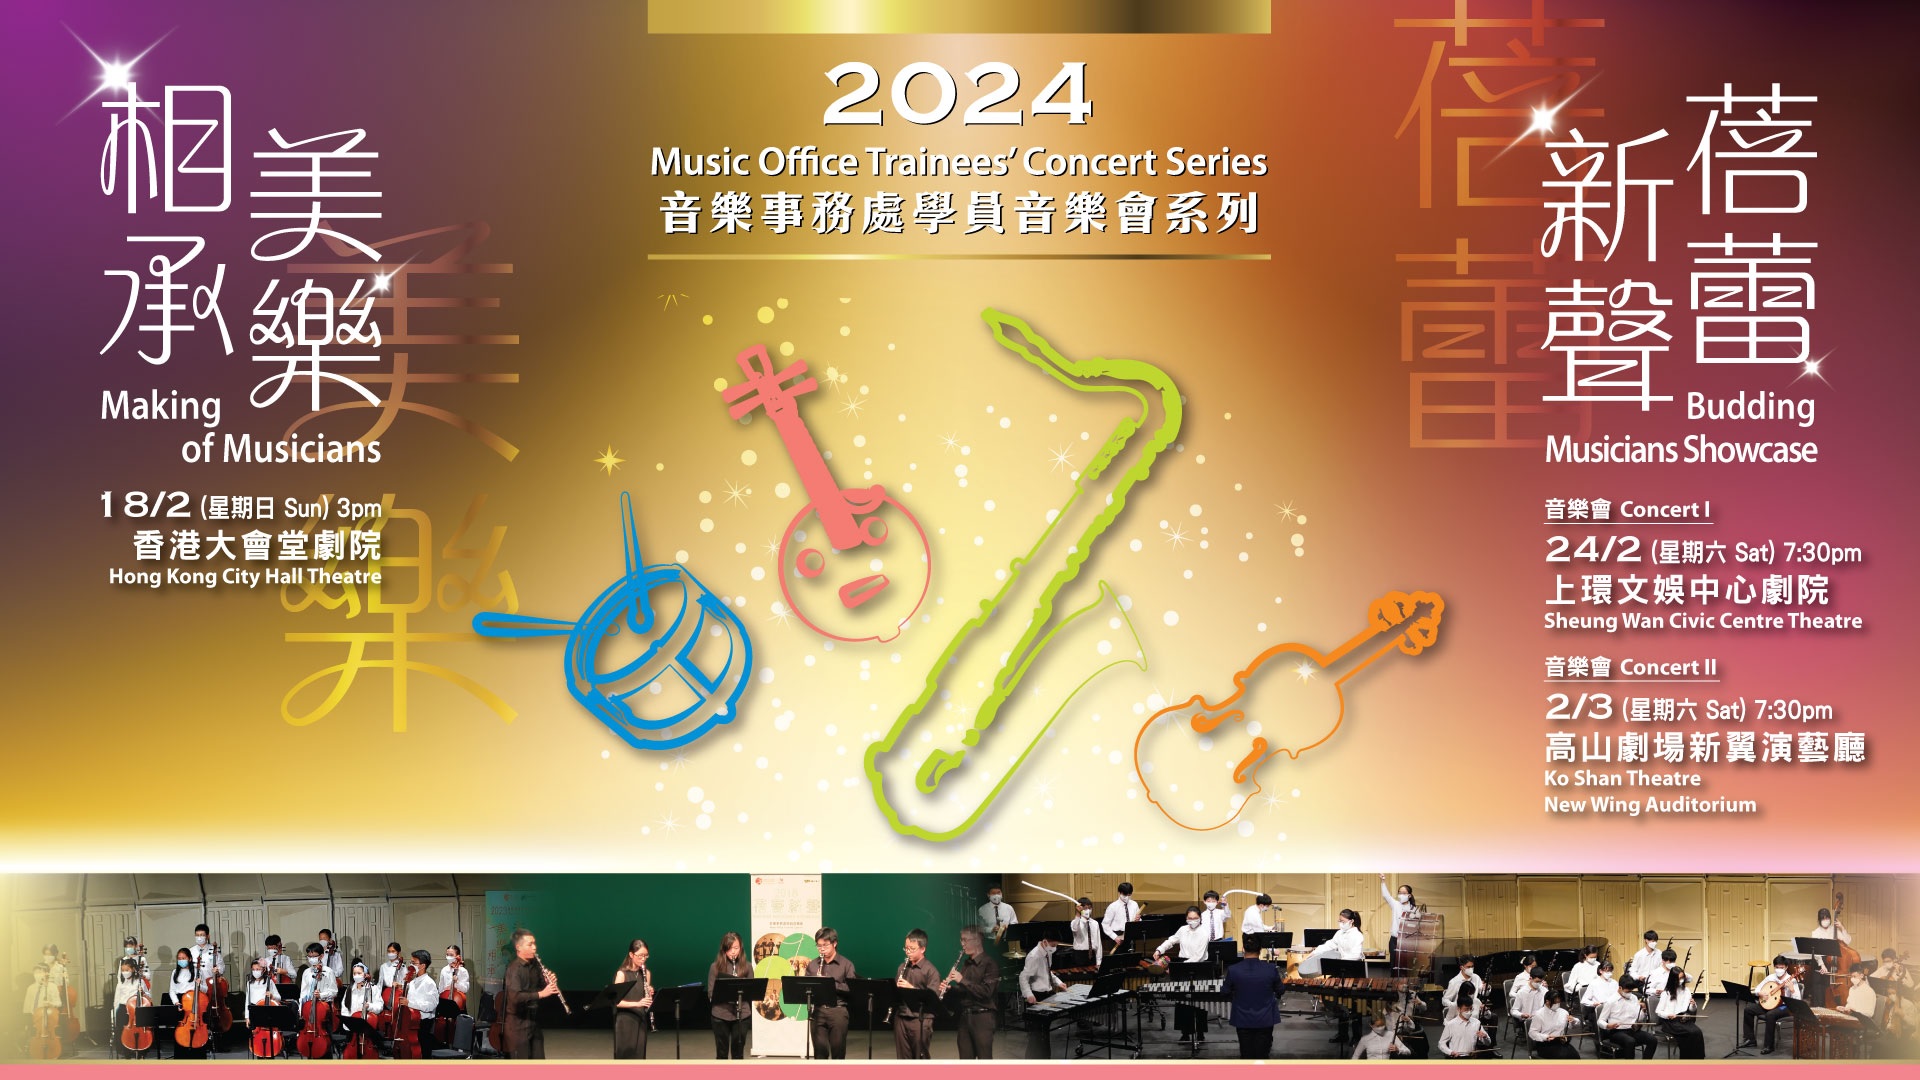 2024 “Making of Musicians” and “Budding Musicians Showcase” Music Office Trainees’ Concerts (Completed) 